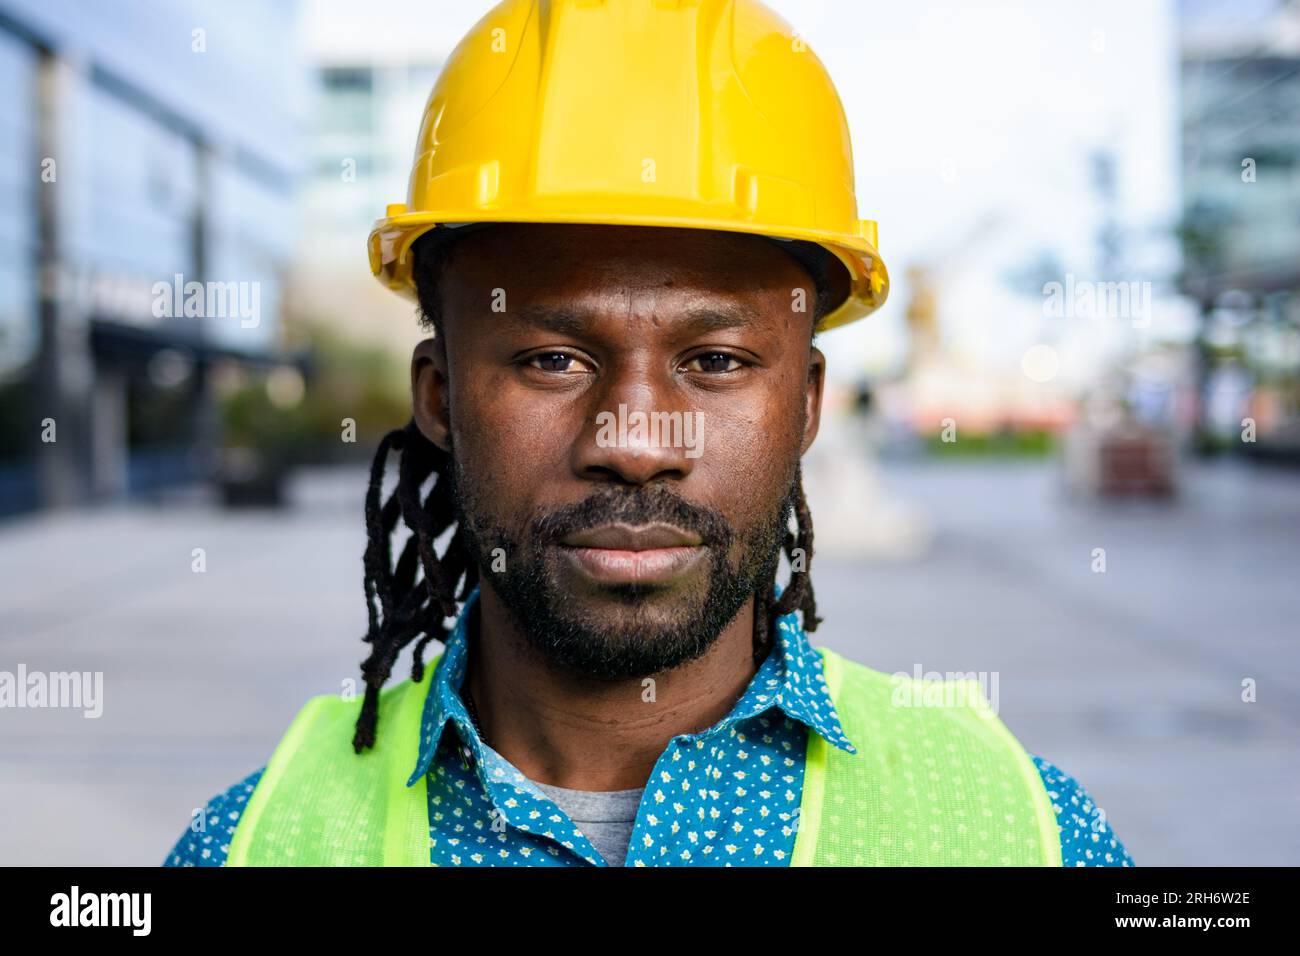 portrait of african ethnicity man with beard and dreadlocks, construction worker wearing helmet and reflective vest, standing outdoors, looking at cam Stock Photo